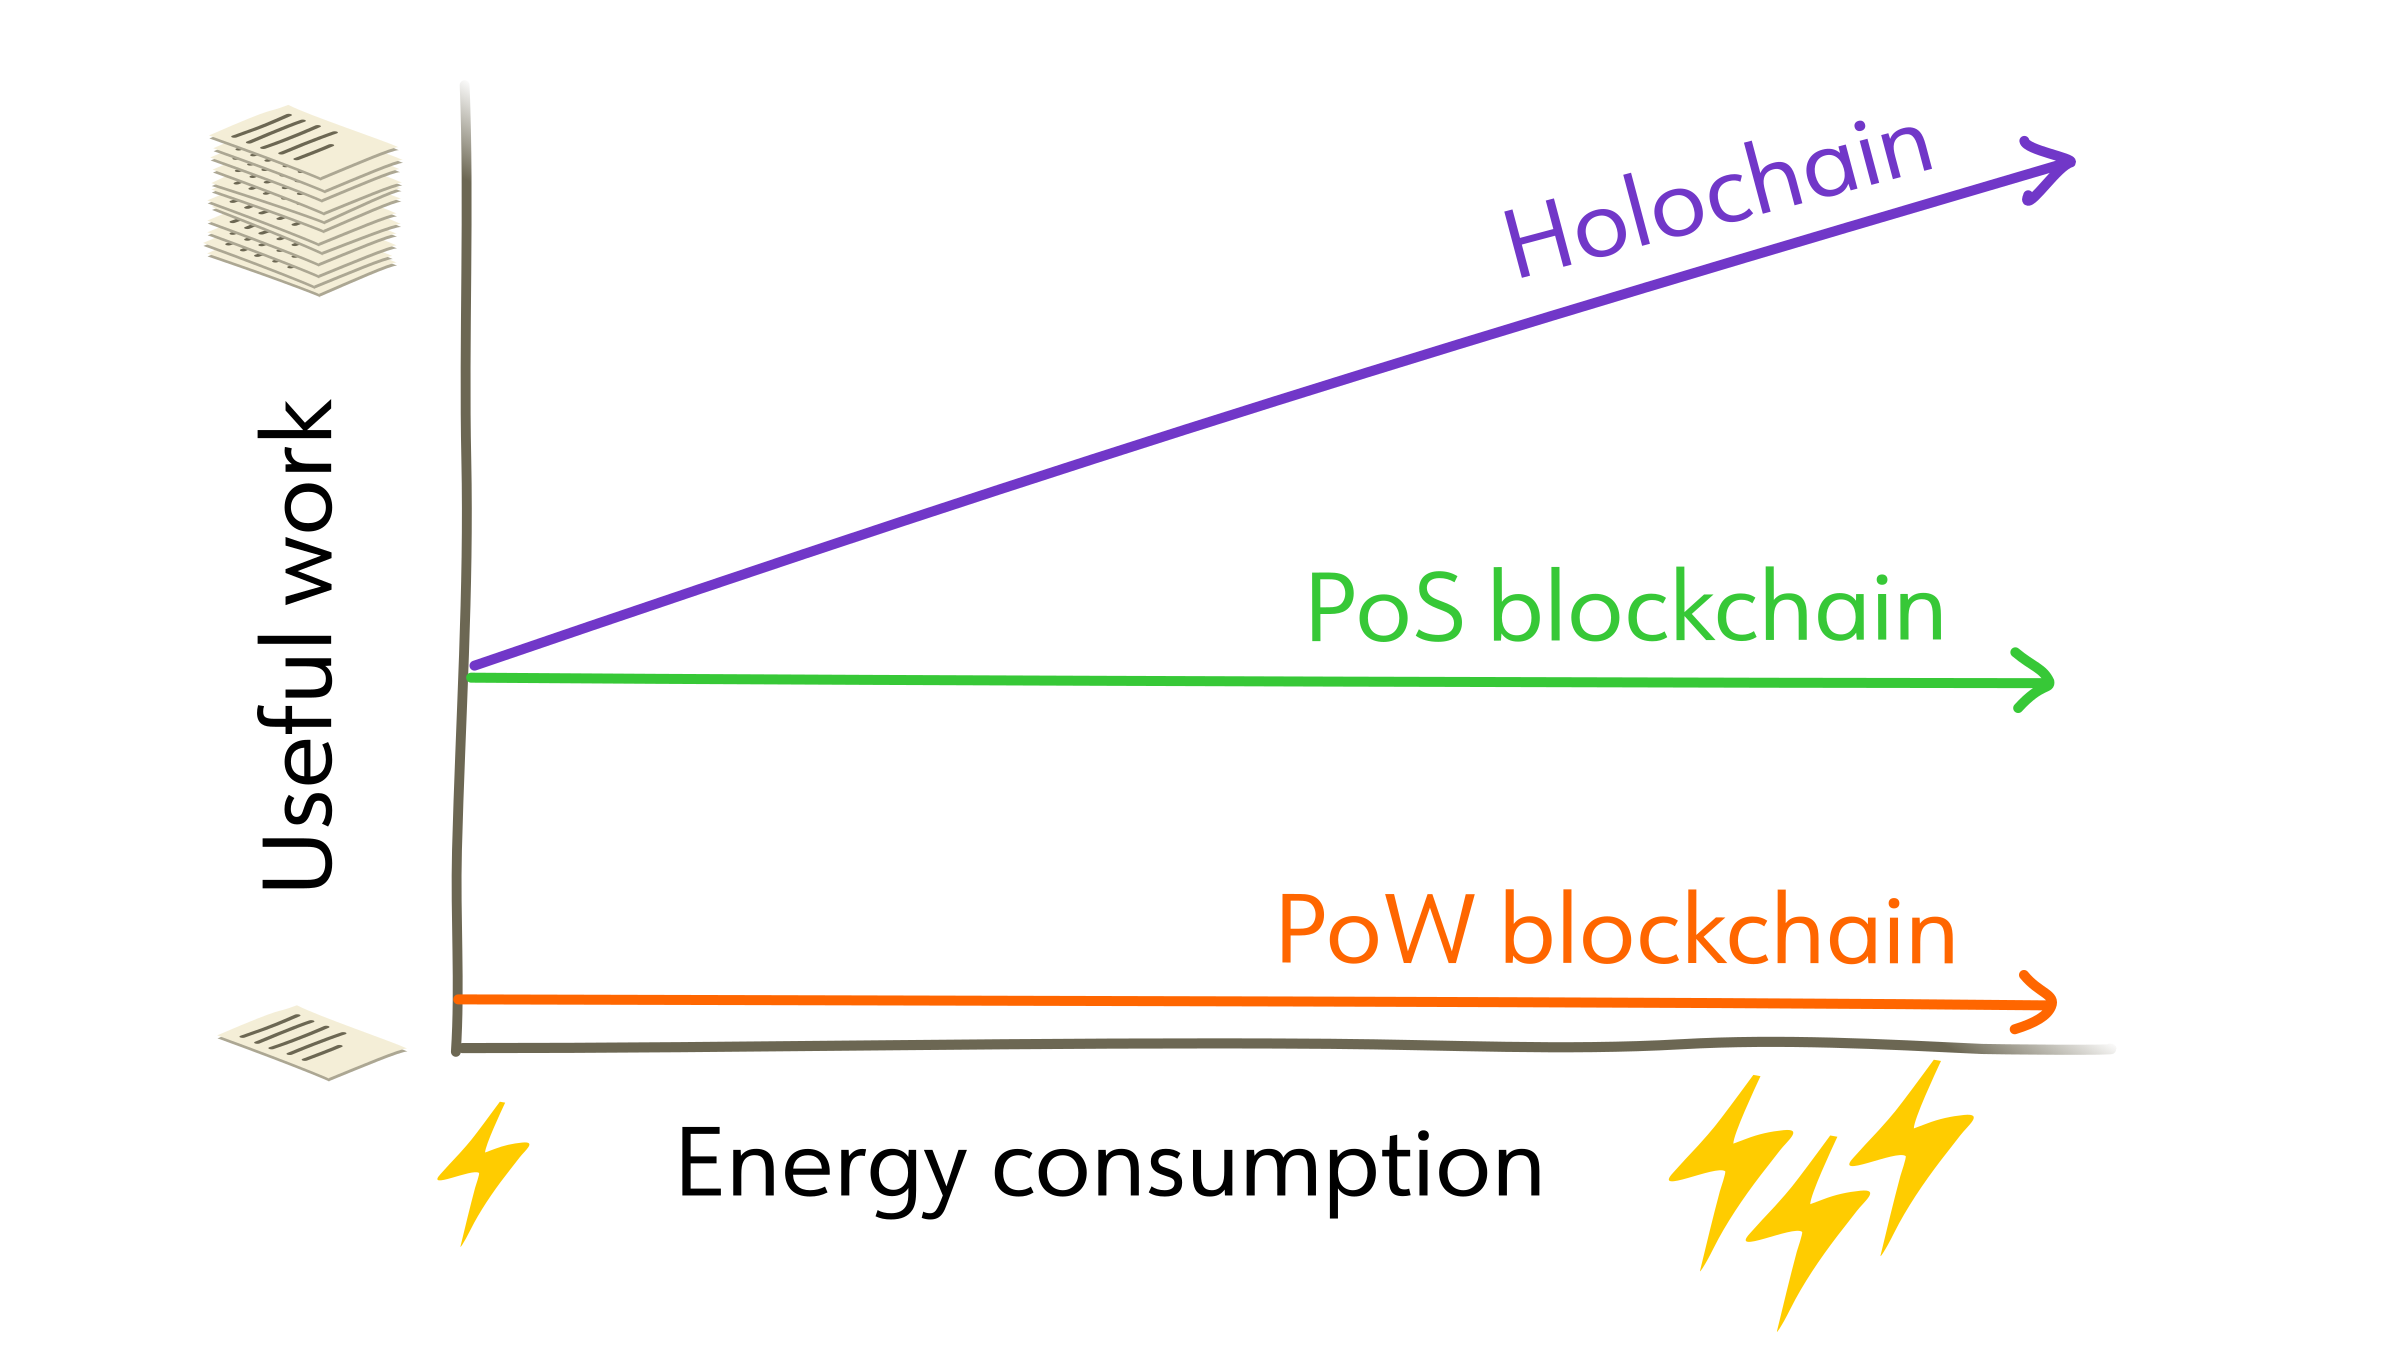 Chart: the relationship between energy consumption (X axis) and useful work performed (Y axis). Proof-of-stake and proof-of-work blockchain both show horizontal lines, which means they perform the same amount of work regardless of energy consumption. Proof-of-work performs considerably less work than proof-of-stake for the same energy. Holochain, on the other hand, starts at the same level as proof-of-work, yet its useful work climbs in relation to energy consumed.